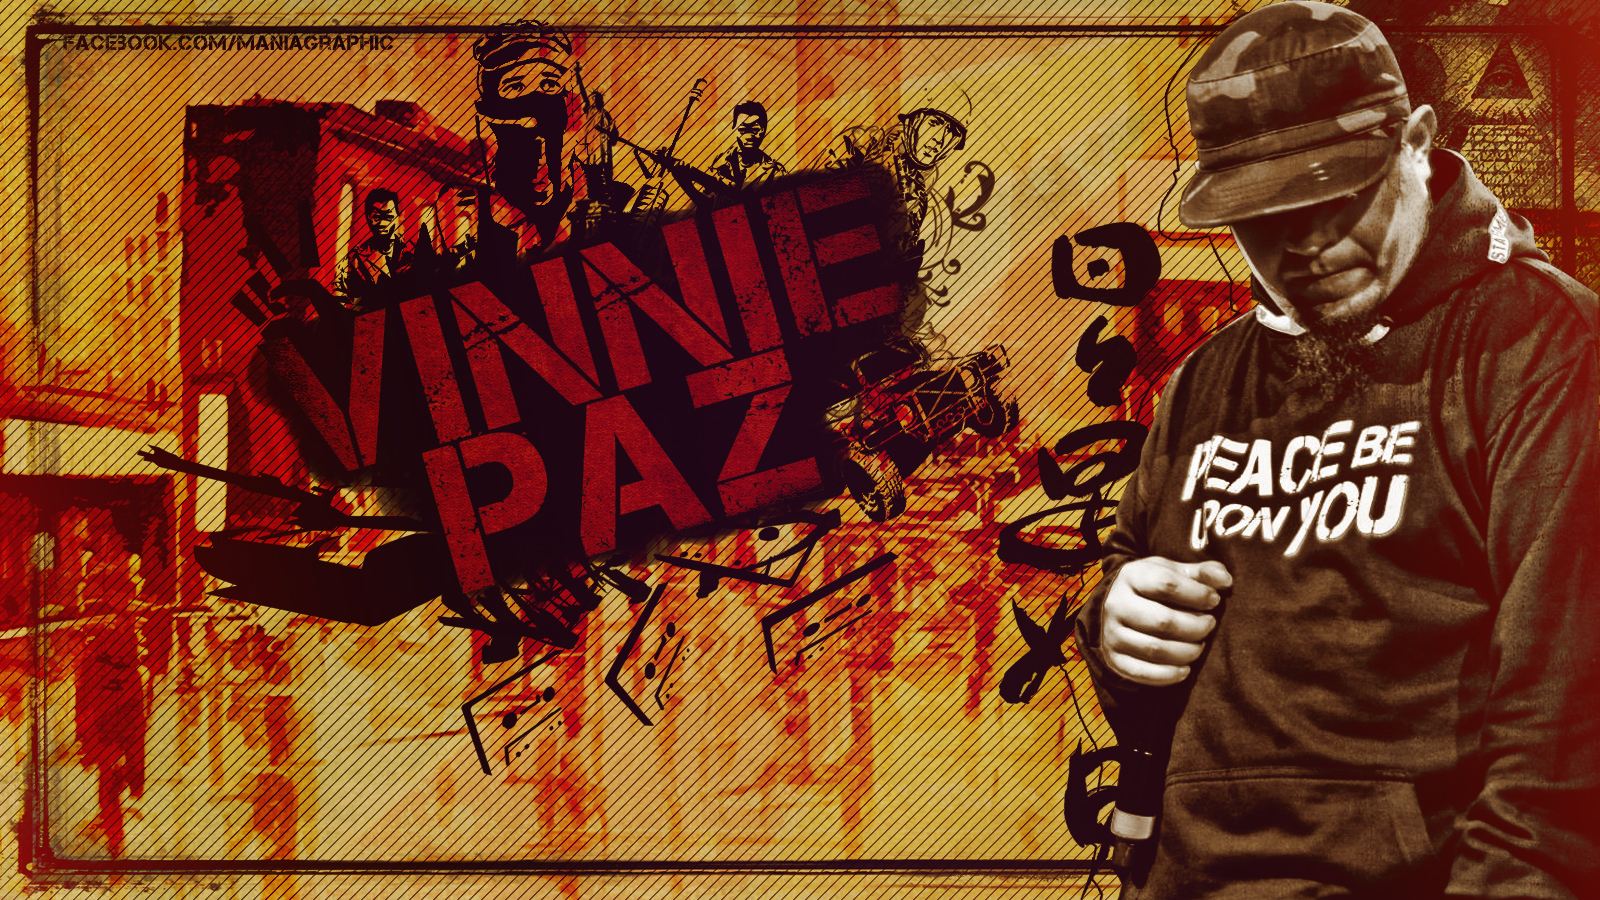 Vinnie Paz Wallpaper By Maniagraphic